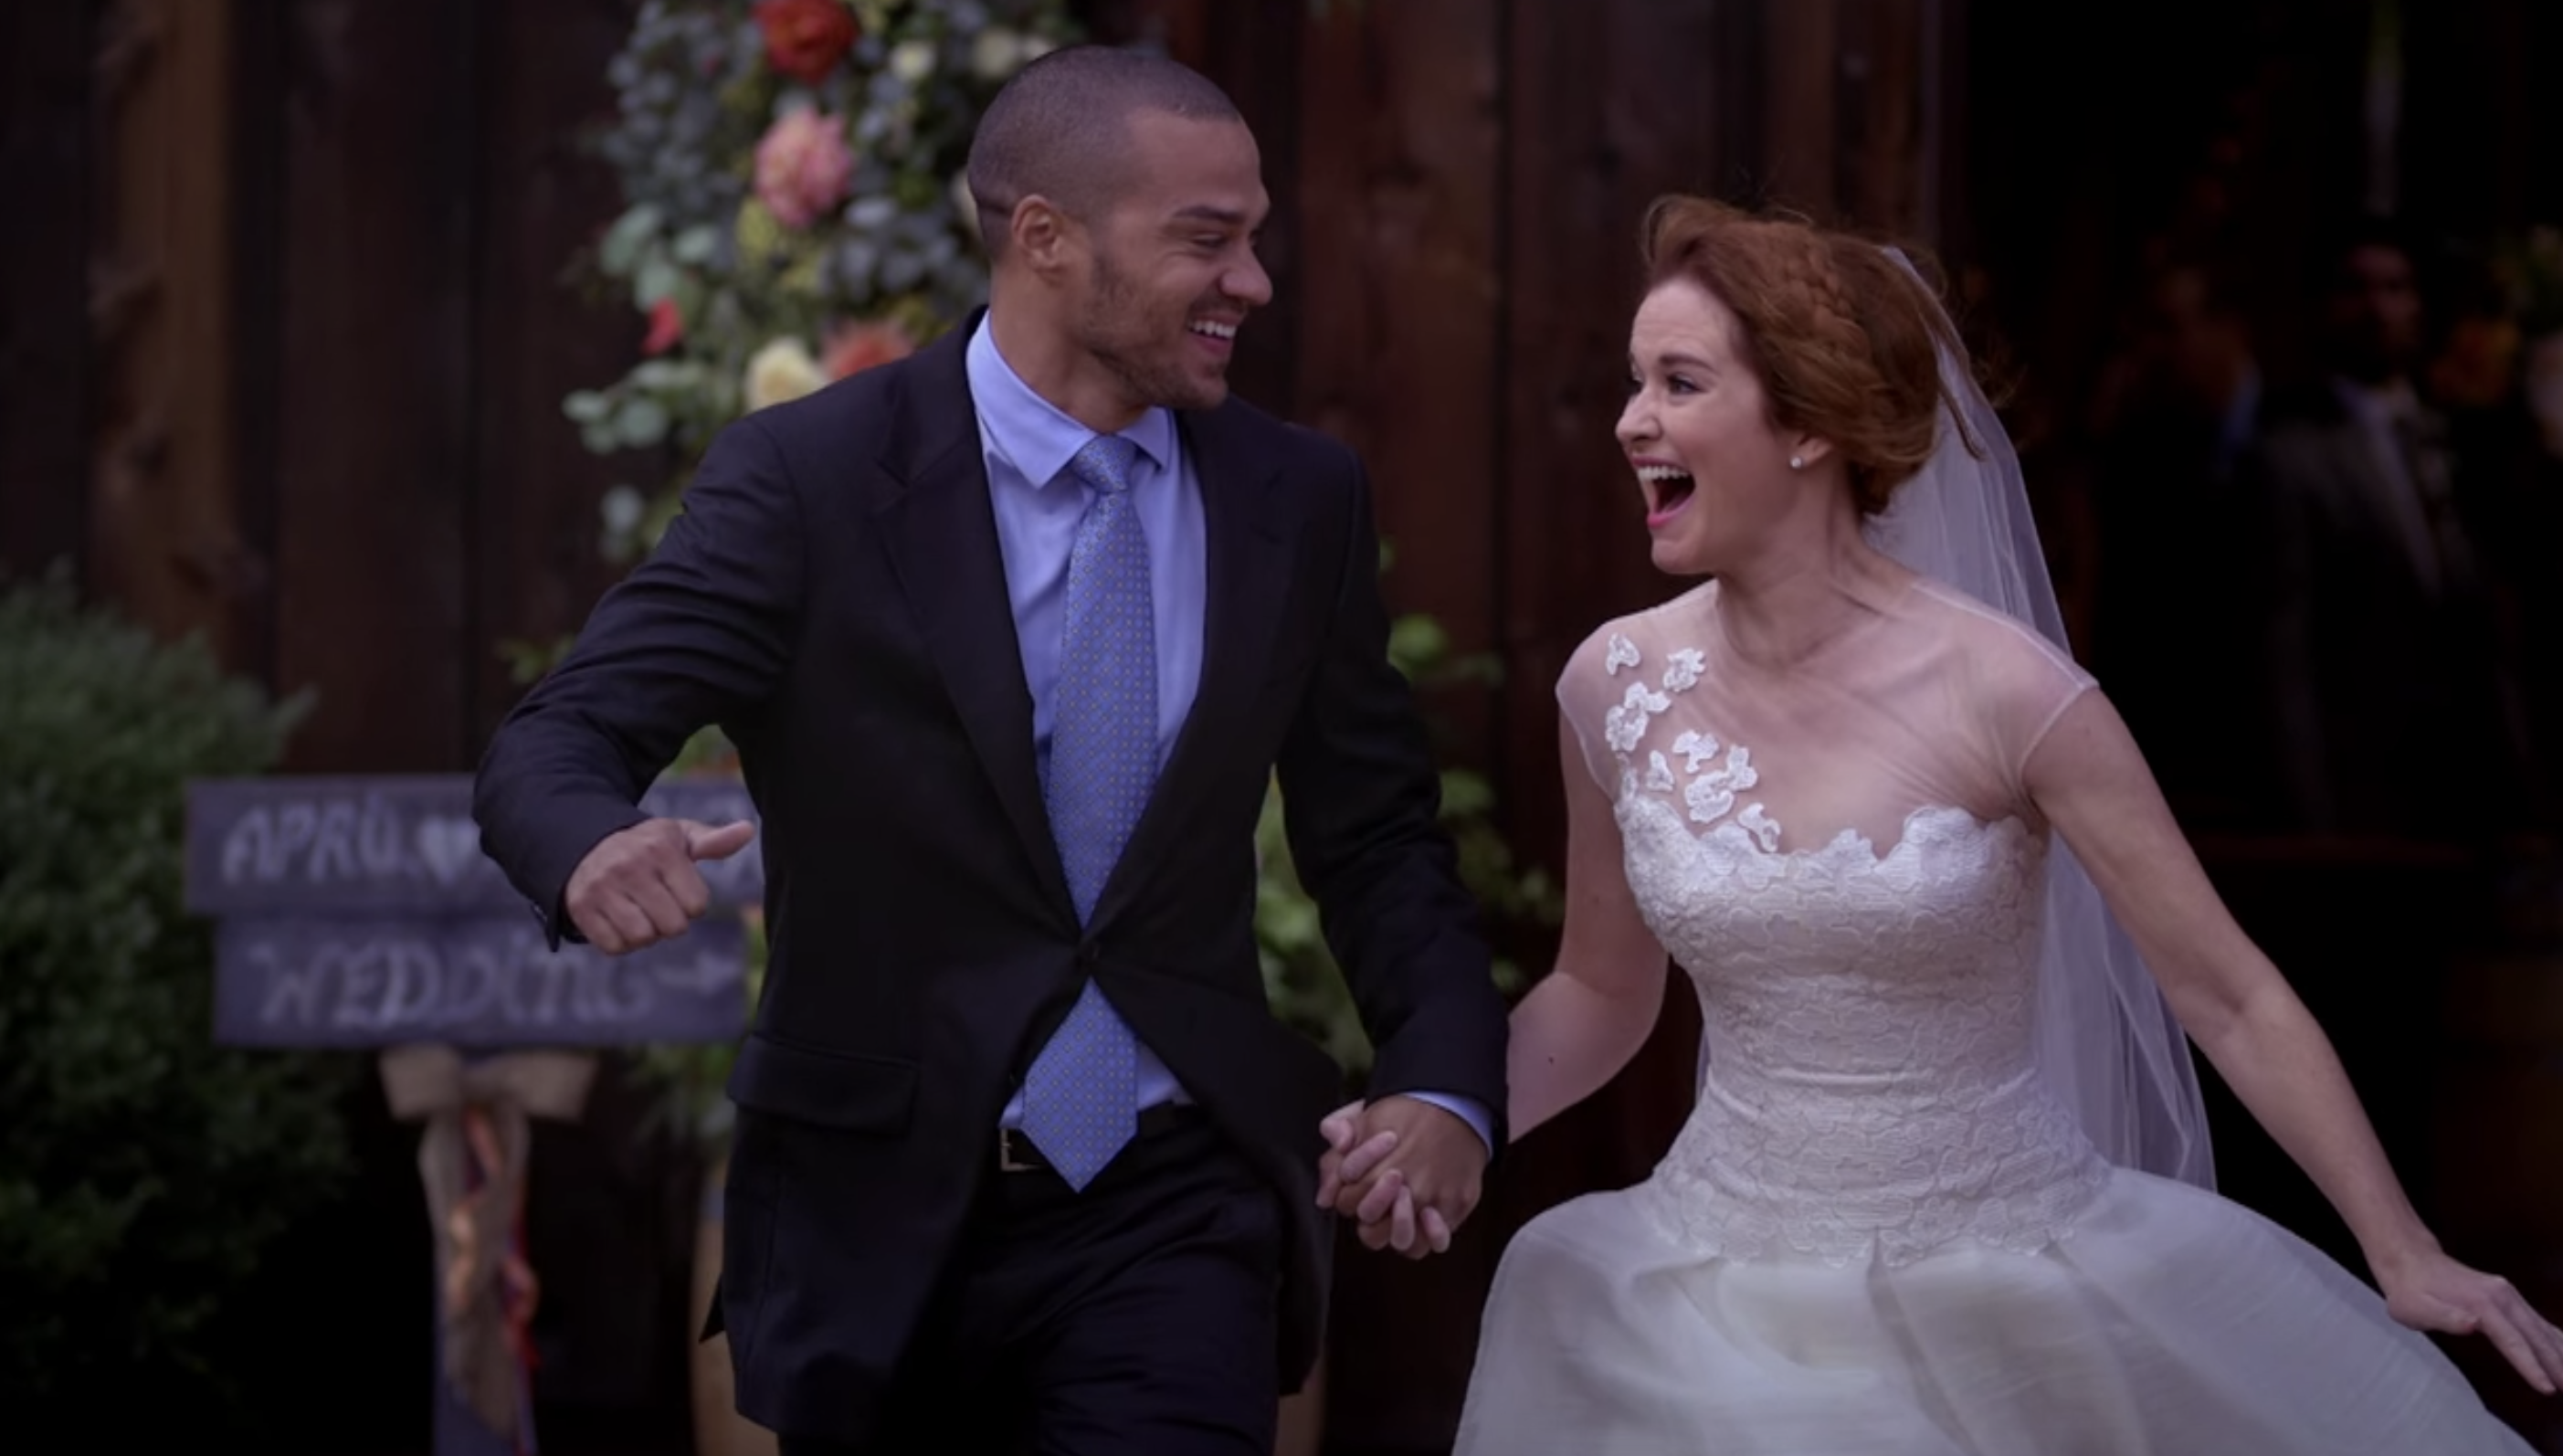 Jackson and April running away from her wedding